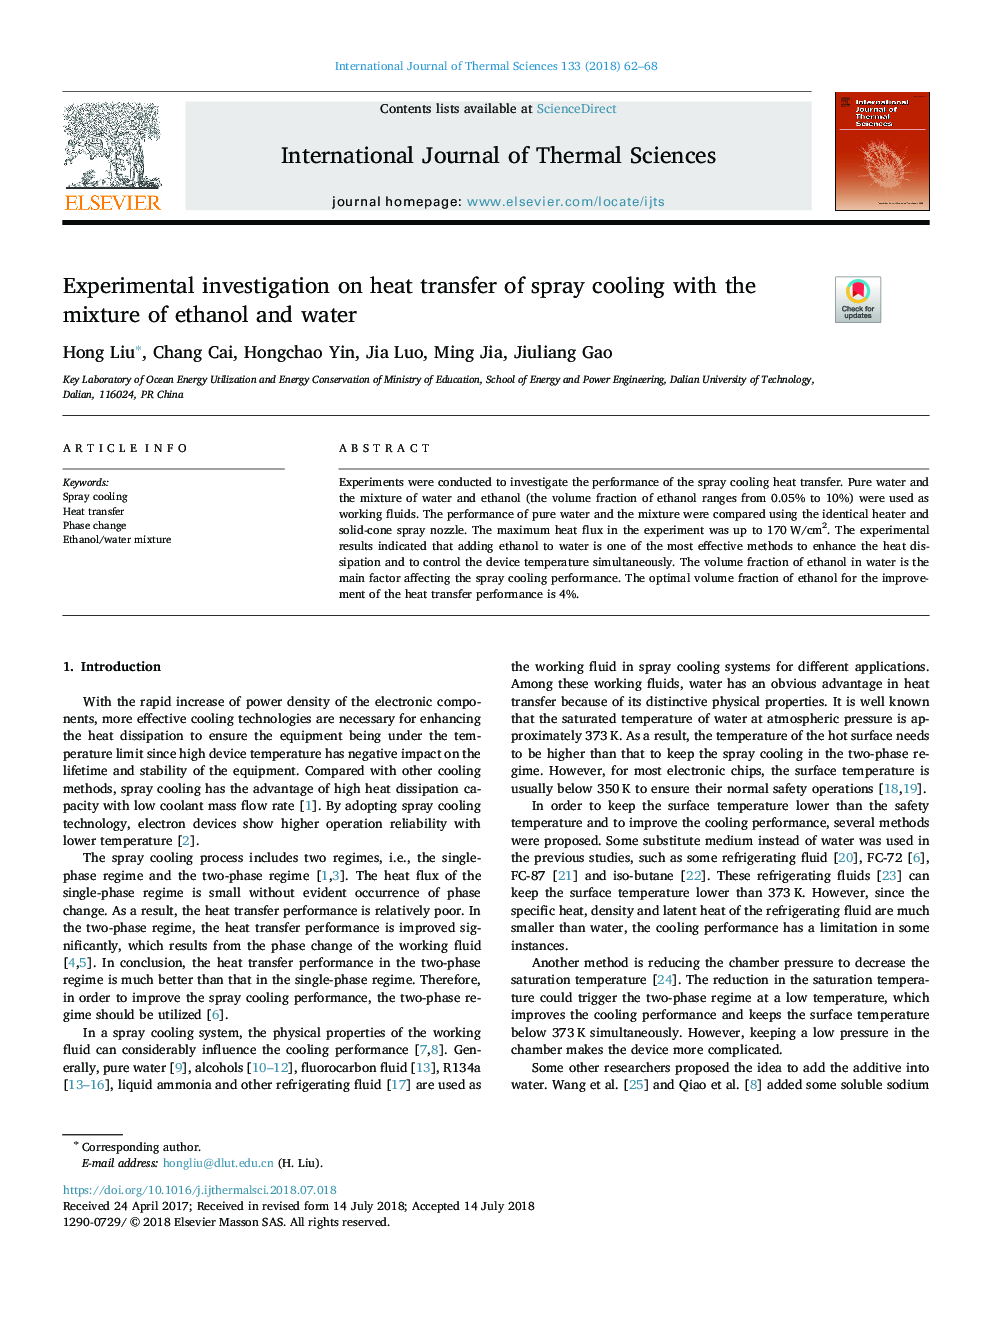 Experimental investigation on heat transfer of spray cooling with the mixture of ethanol and water